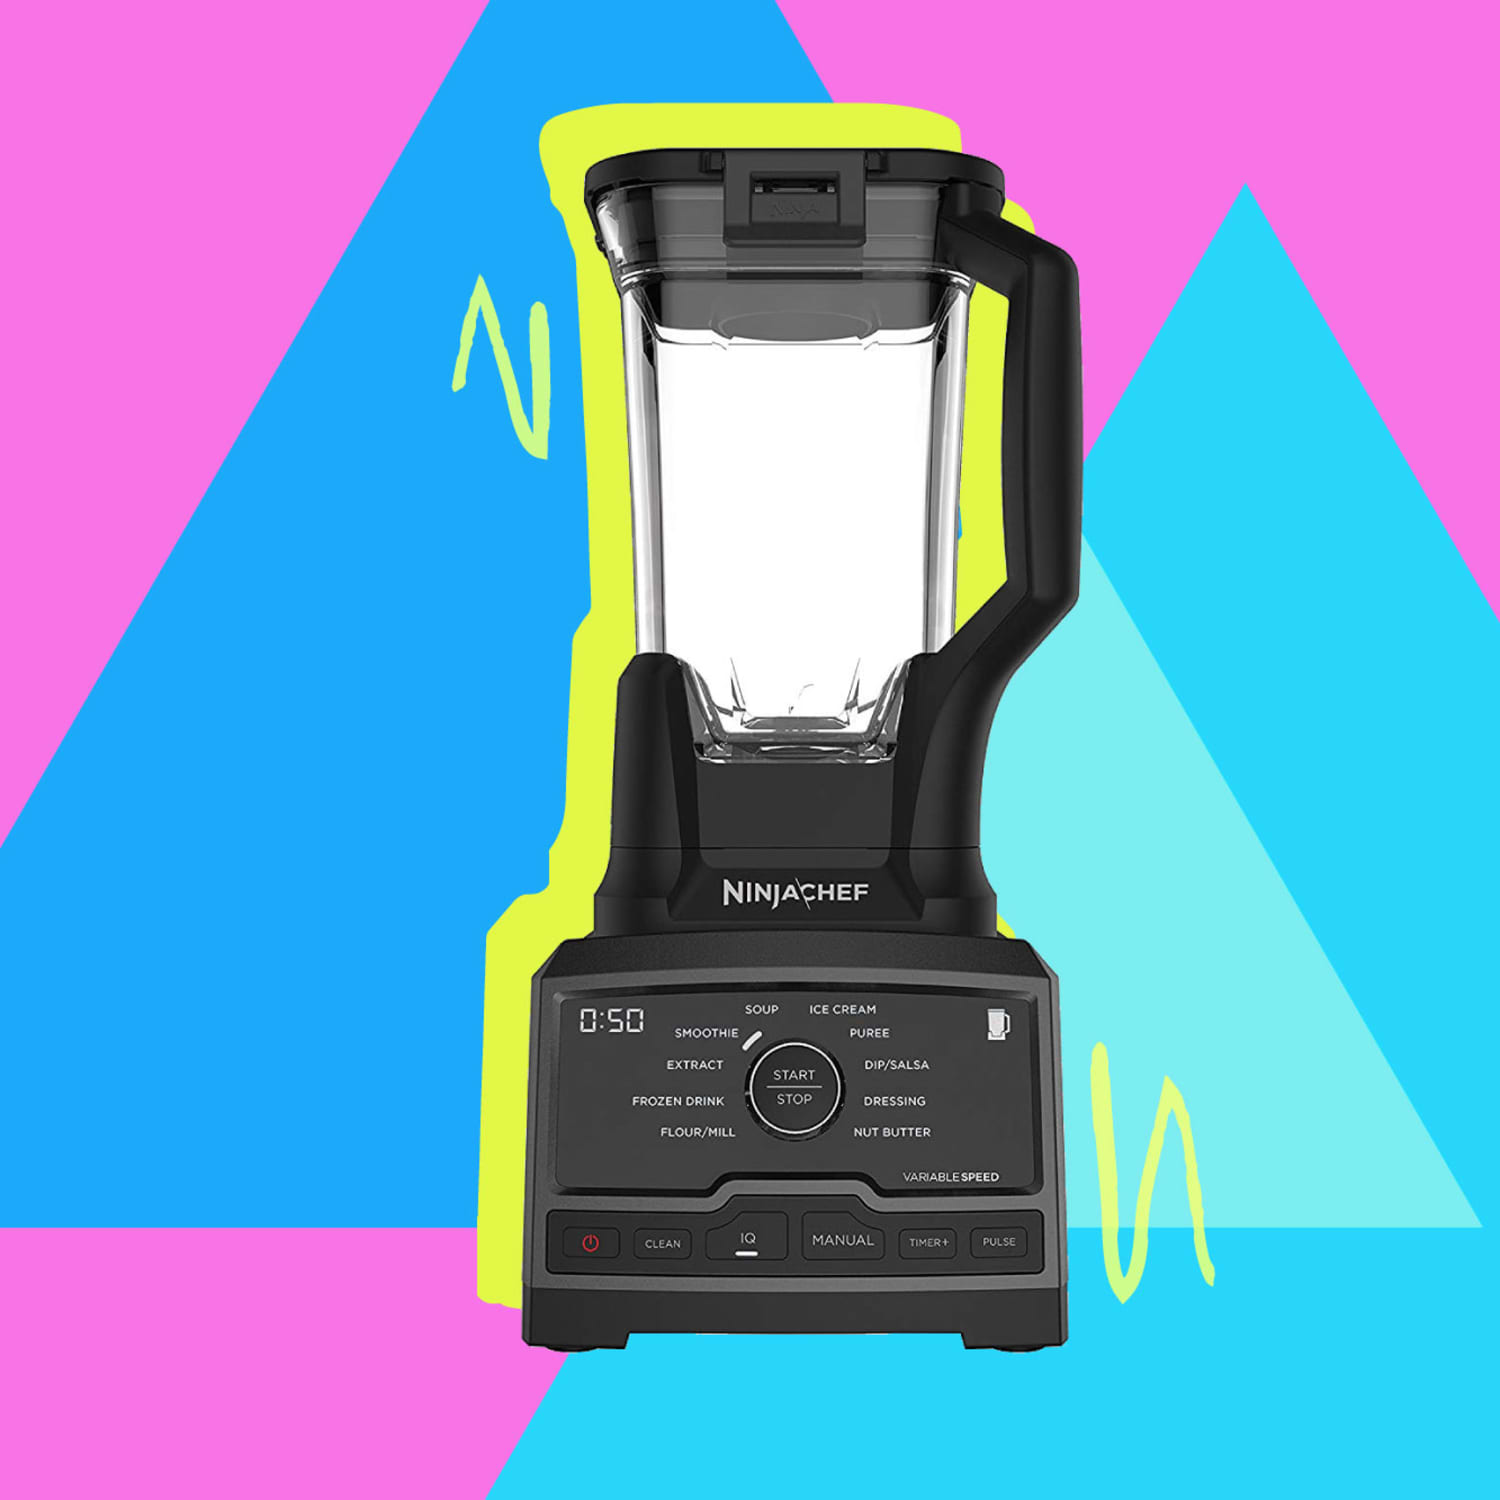 Small Home Appliances: Blenders, Toasters, + More, Urban Outfitters